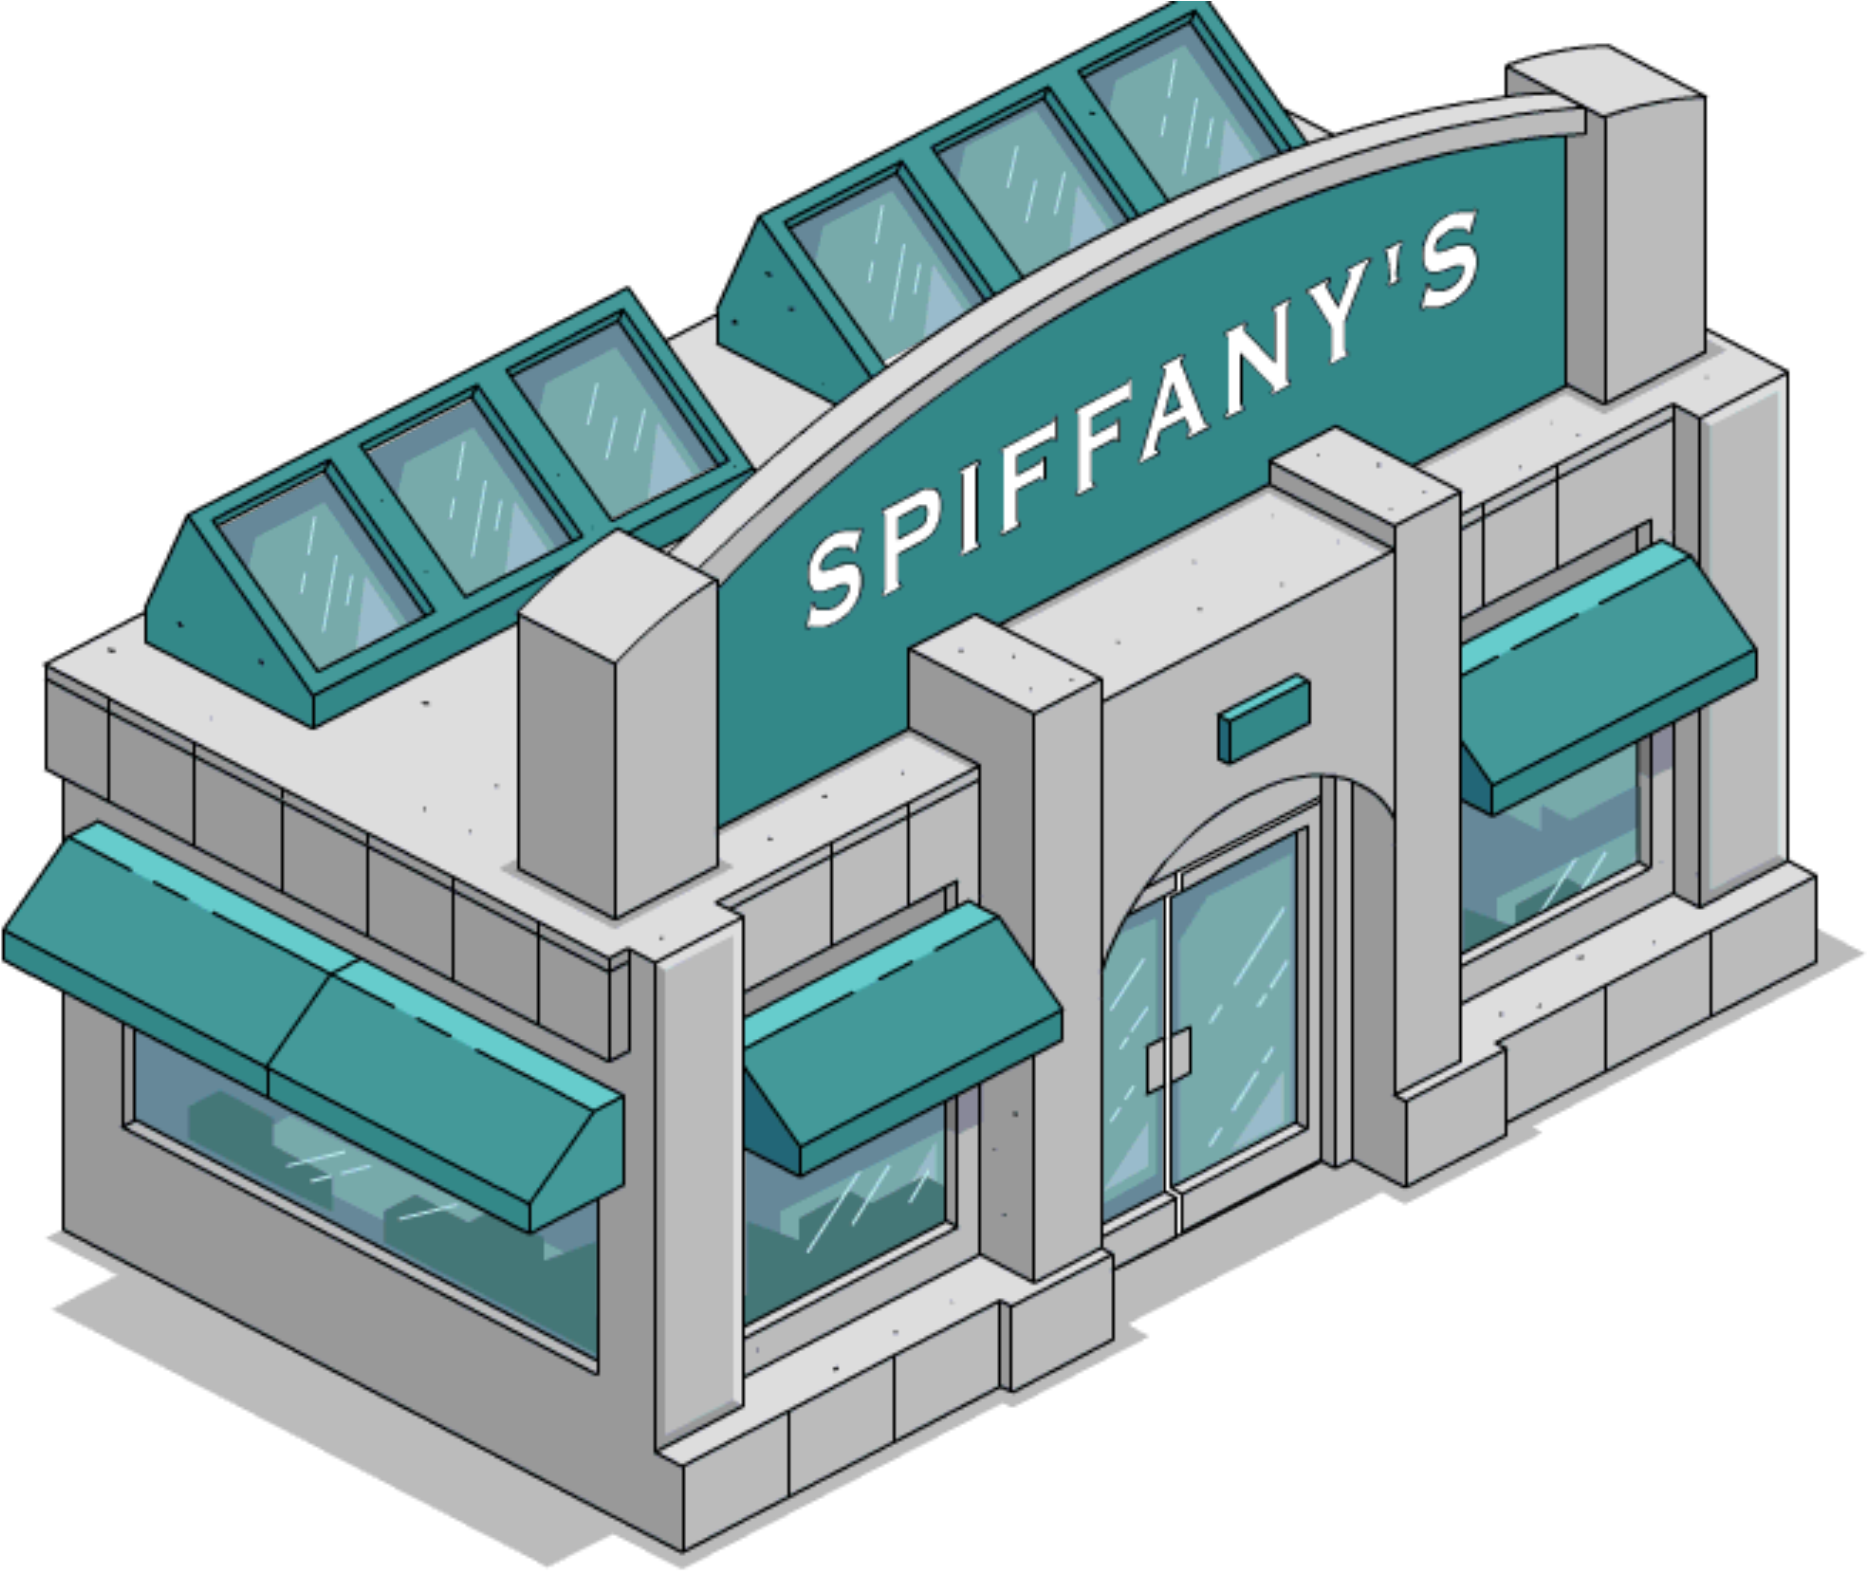 Spiffany's Large - Clipart Government Springfield Bulding By Totopix Me (1884x1591)